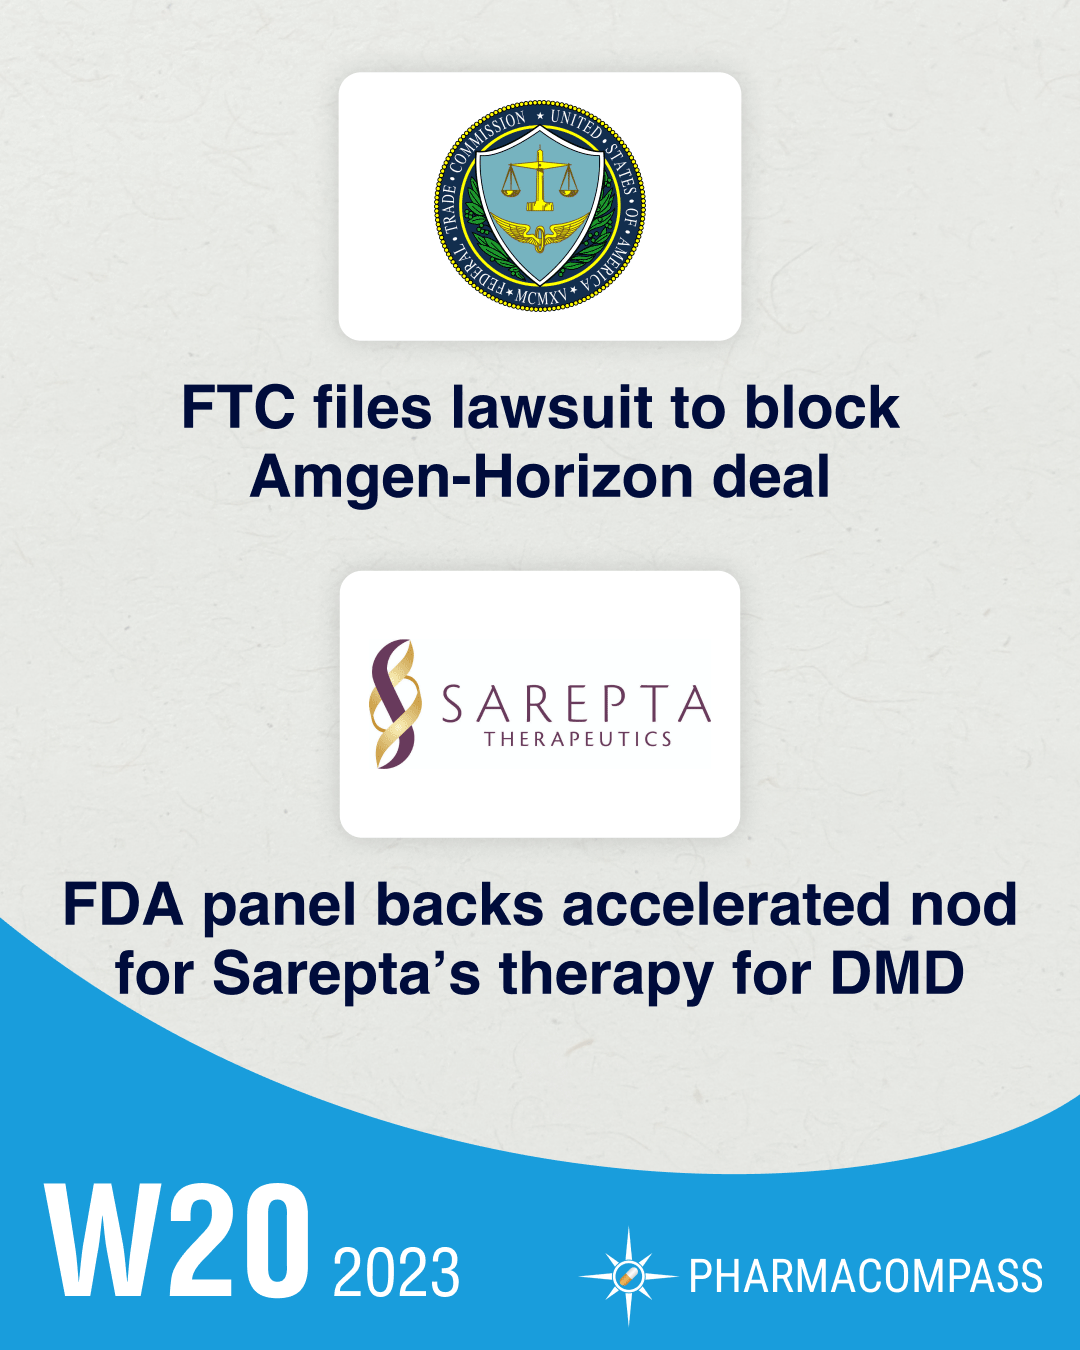 FTC files lawsuit to block Amgen-Horizon deal; FDA panel backs accelerated nod for Sarepta’s therapy for DMD